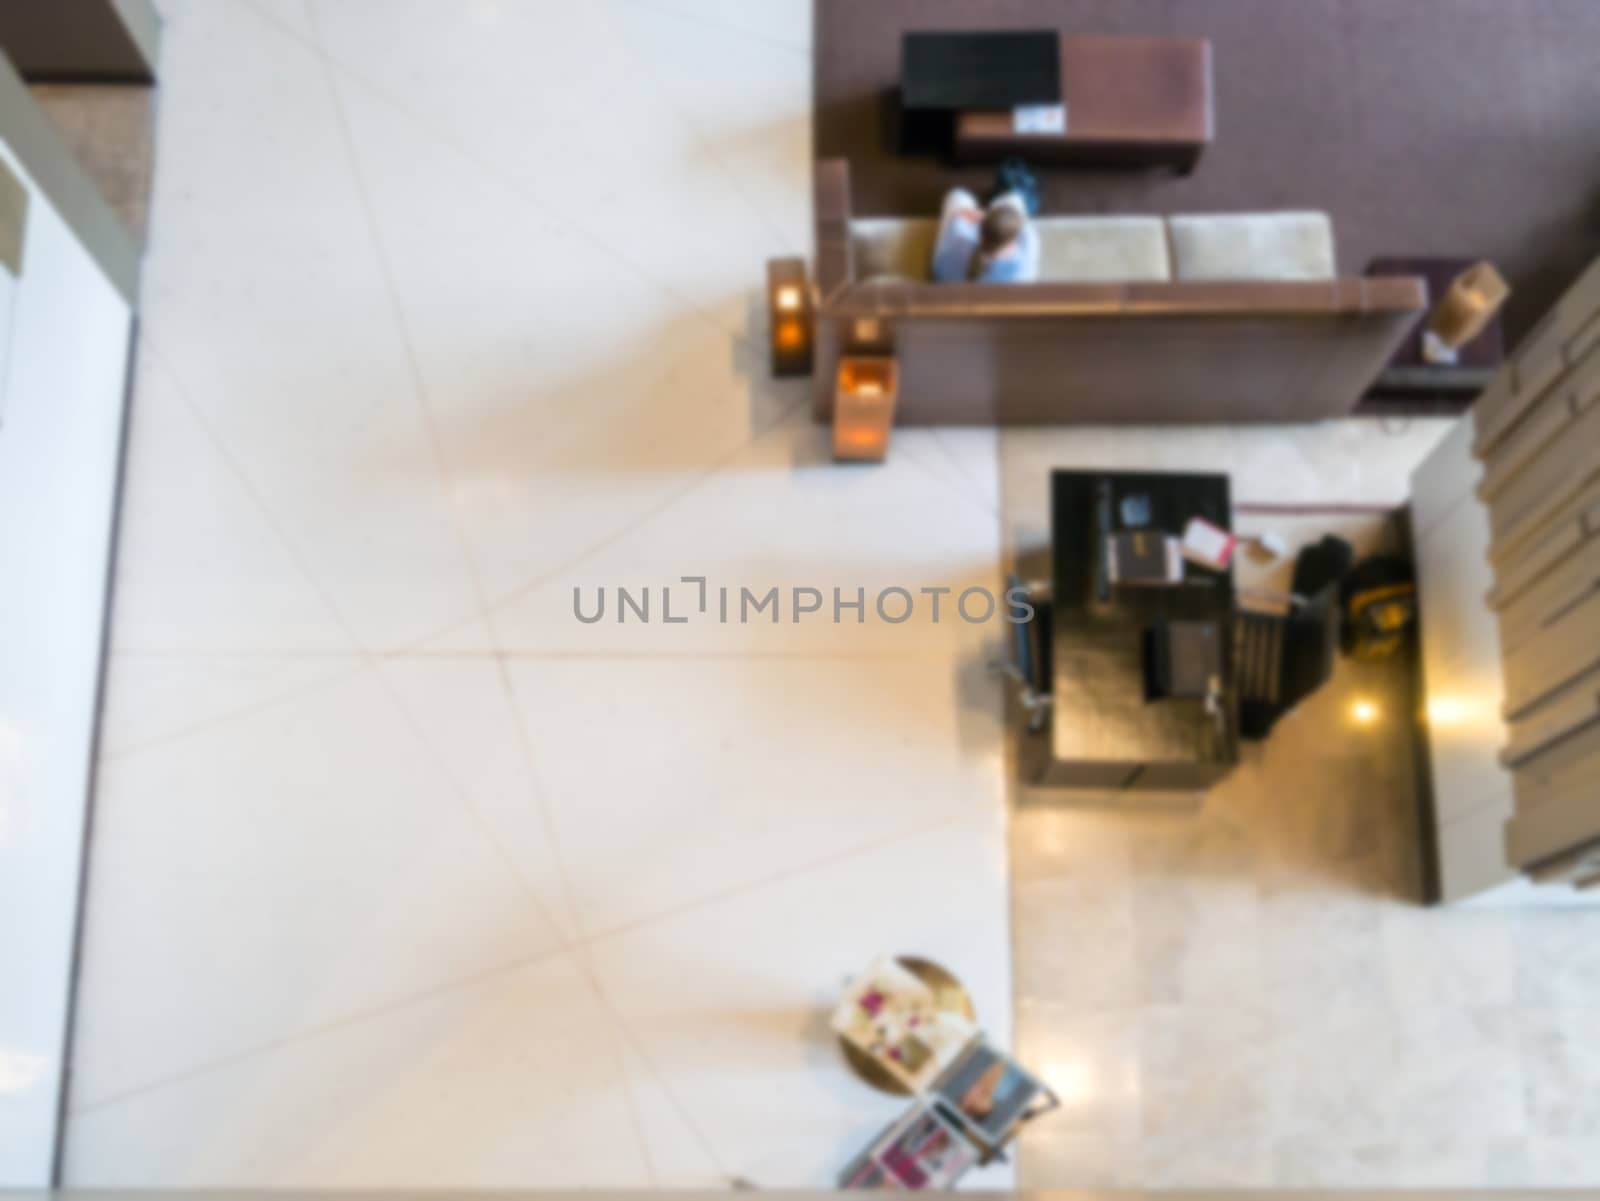 Blurred,The hotel receptionist is currently serving customers. by supirak